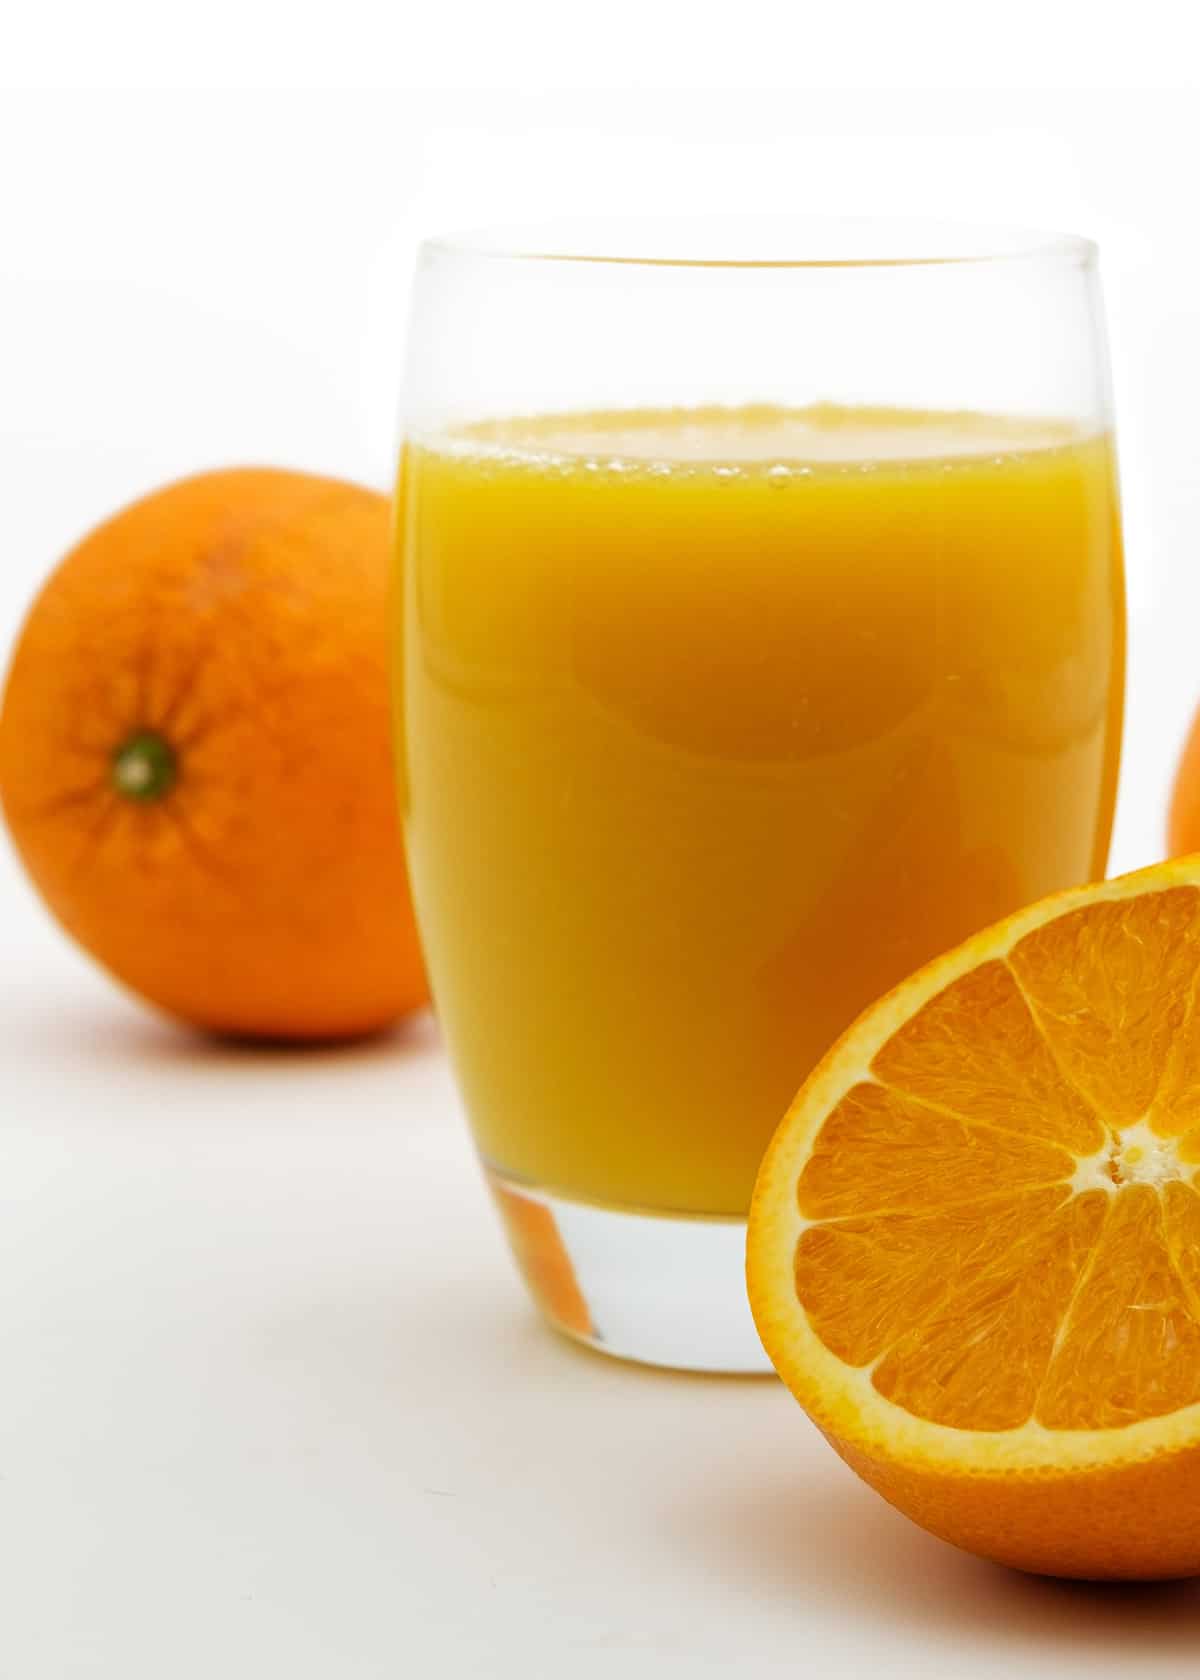 A glass of fresh squeezed orange juice.